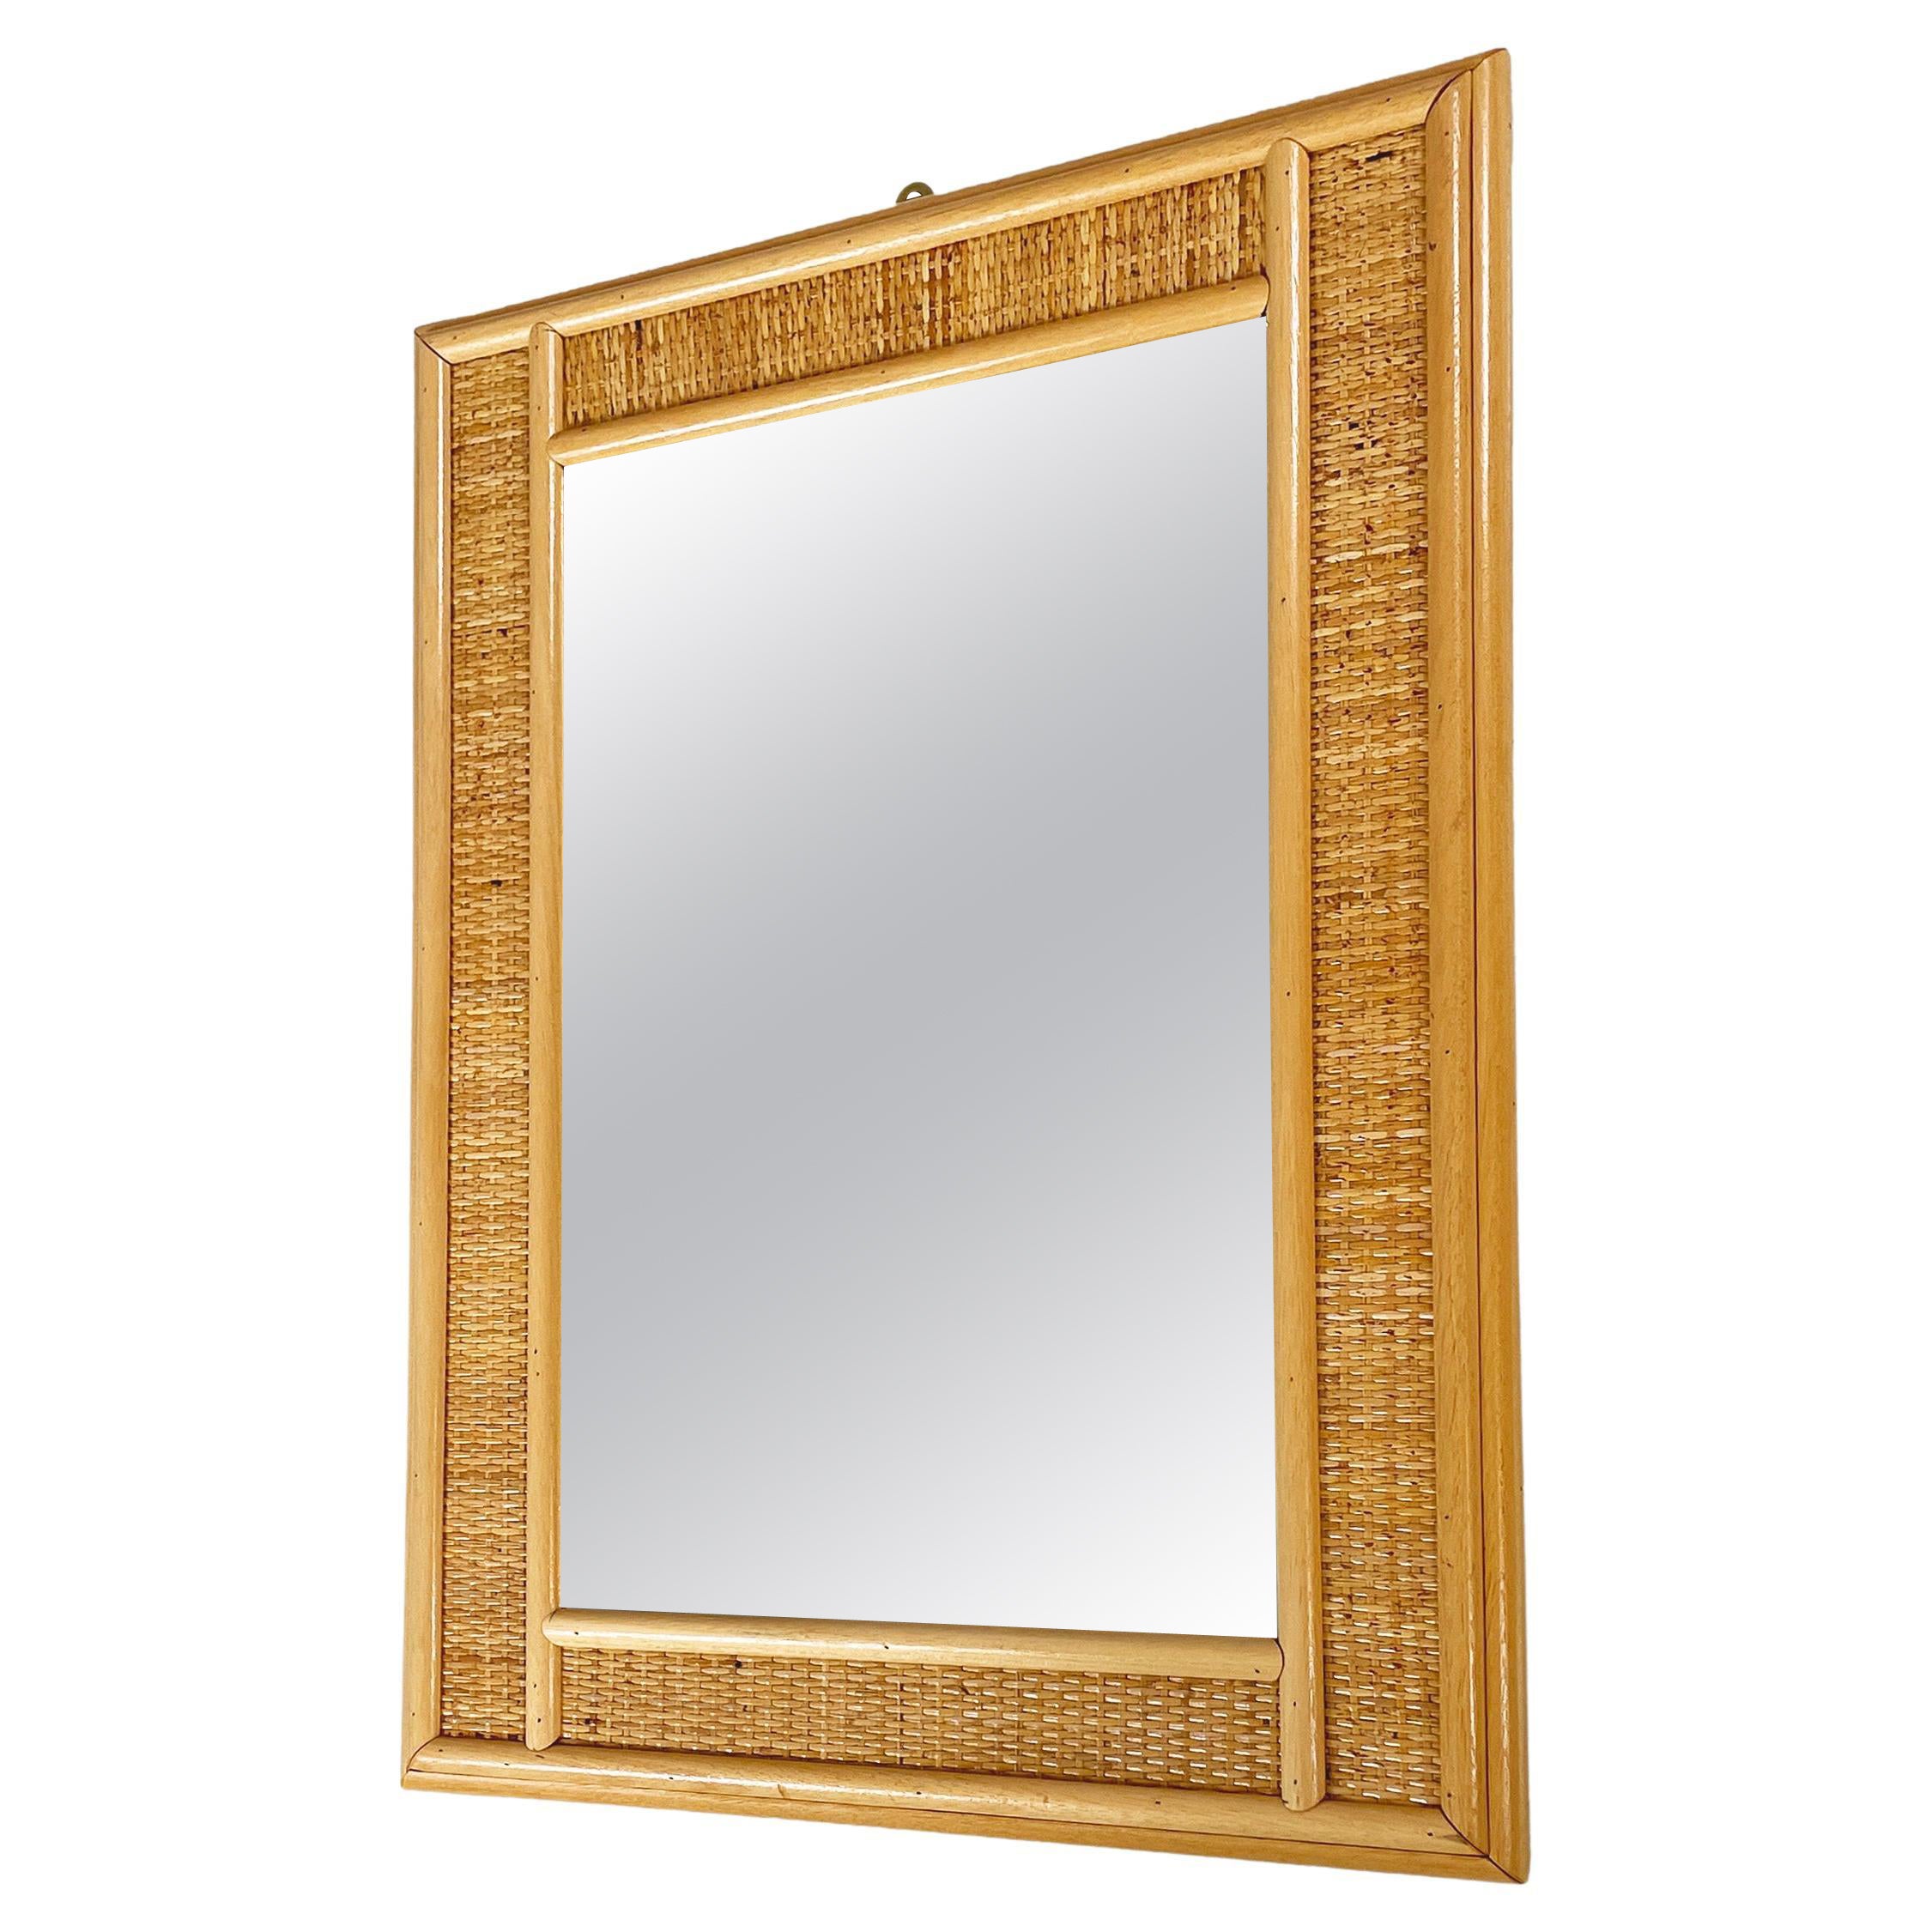 Italian mid-century modern Rectangular wall mirror in wood and rattan, 1960s For Sale